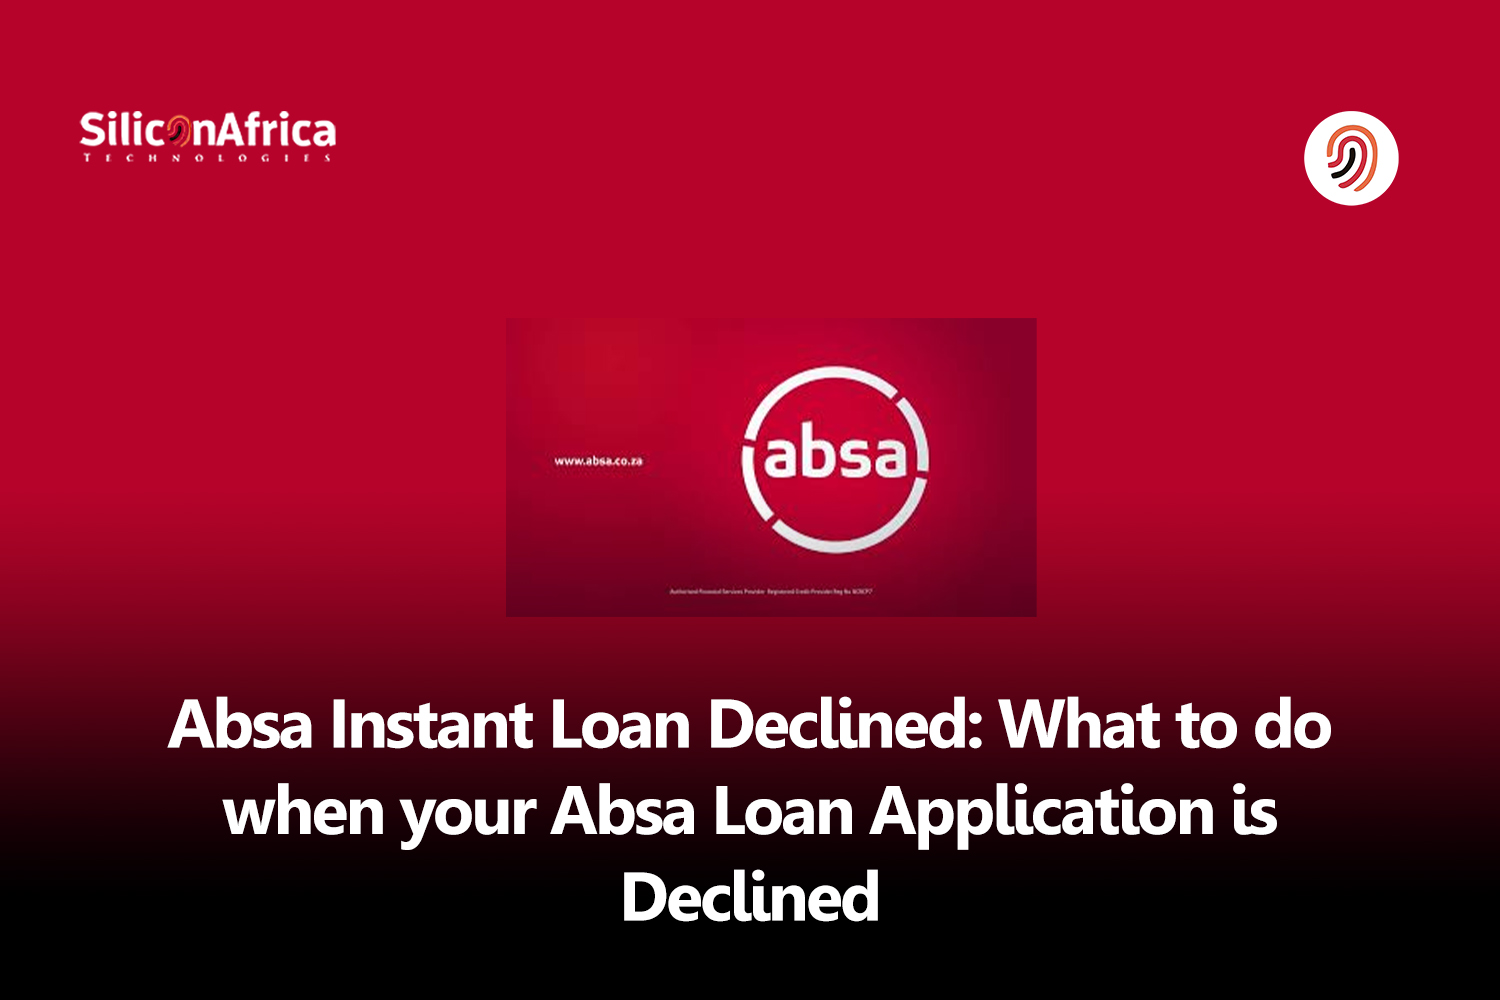 Absa Instant Loan Declined: What To Do When Your Absa Loan Application is Declined